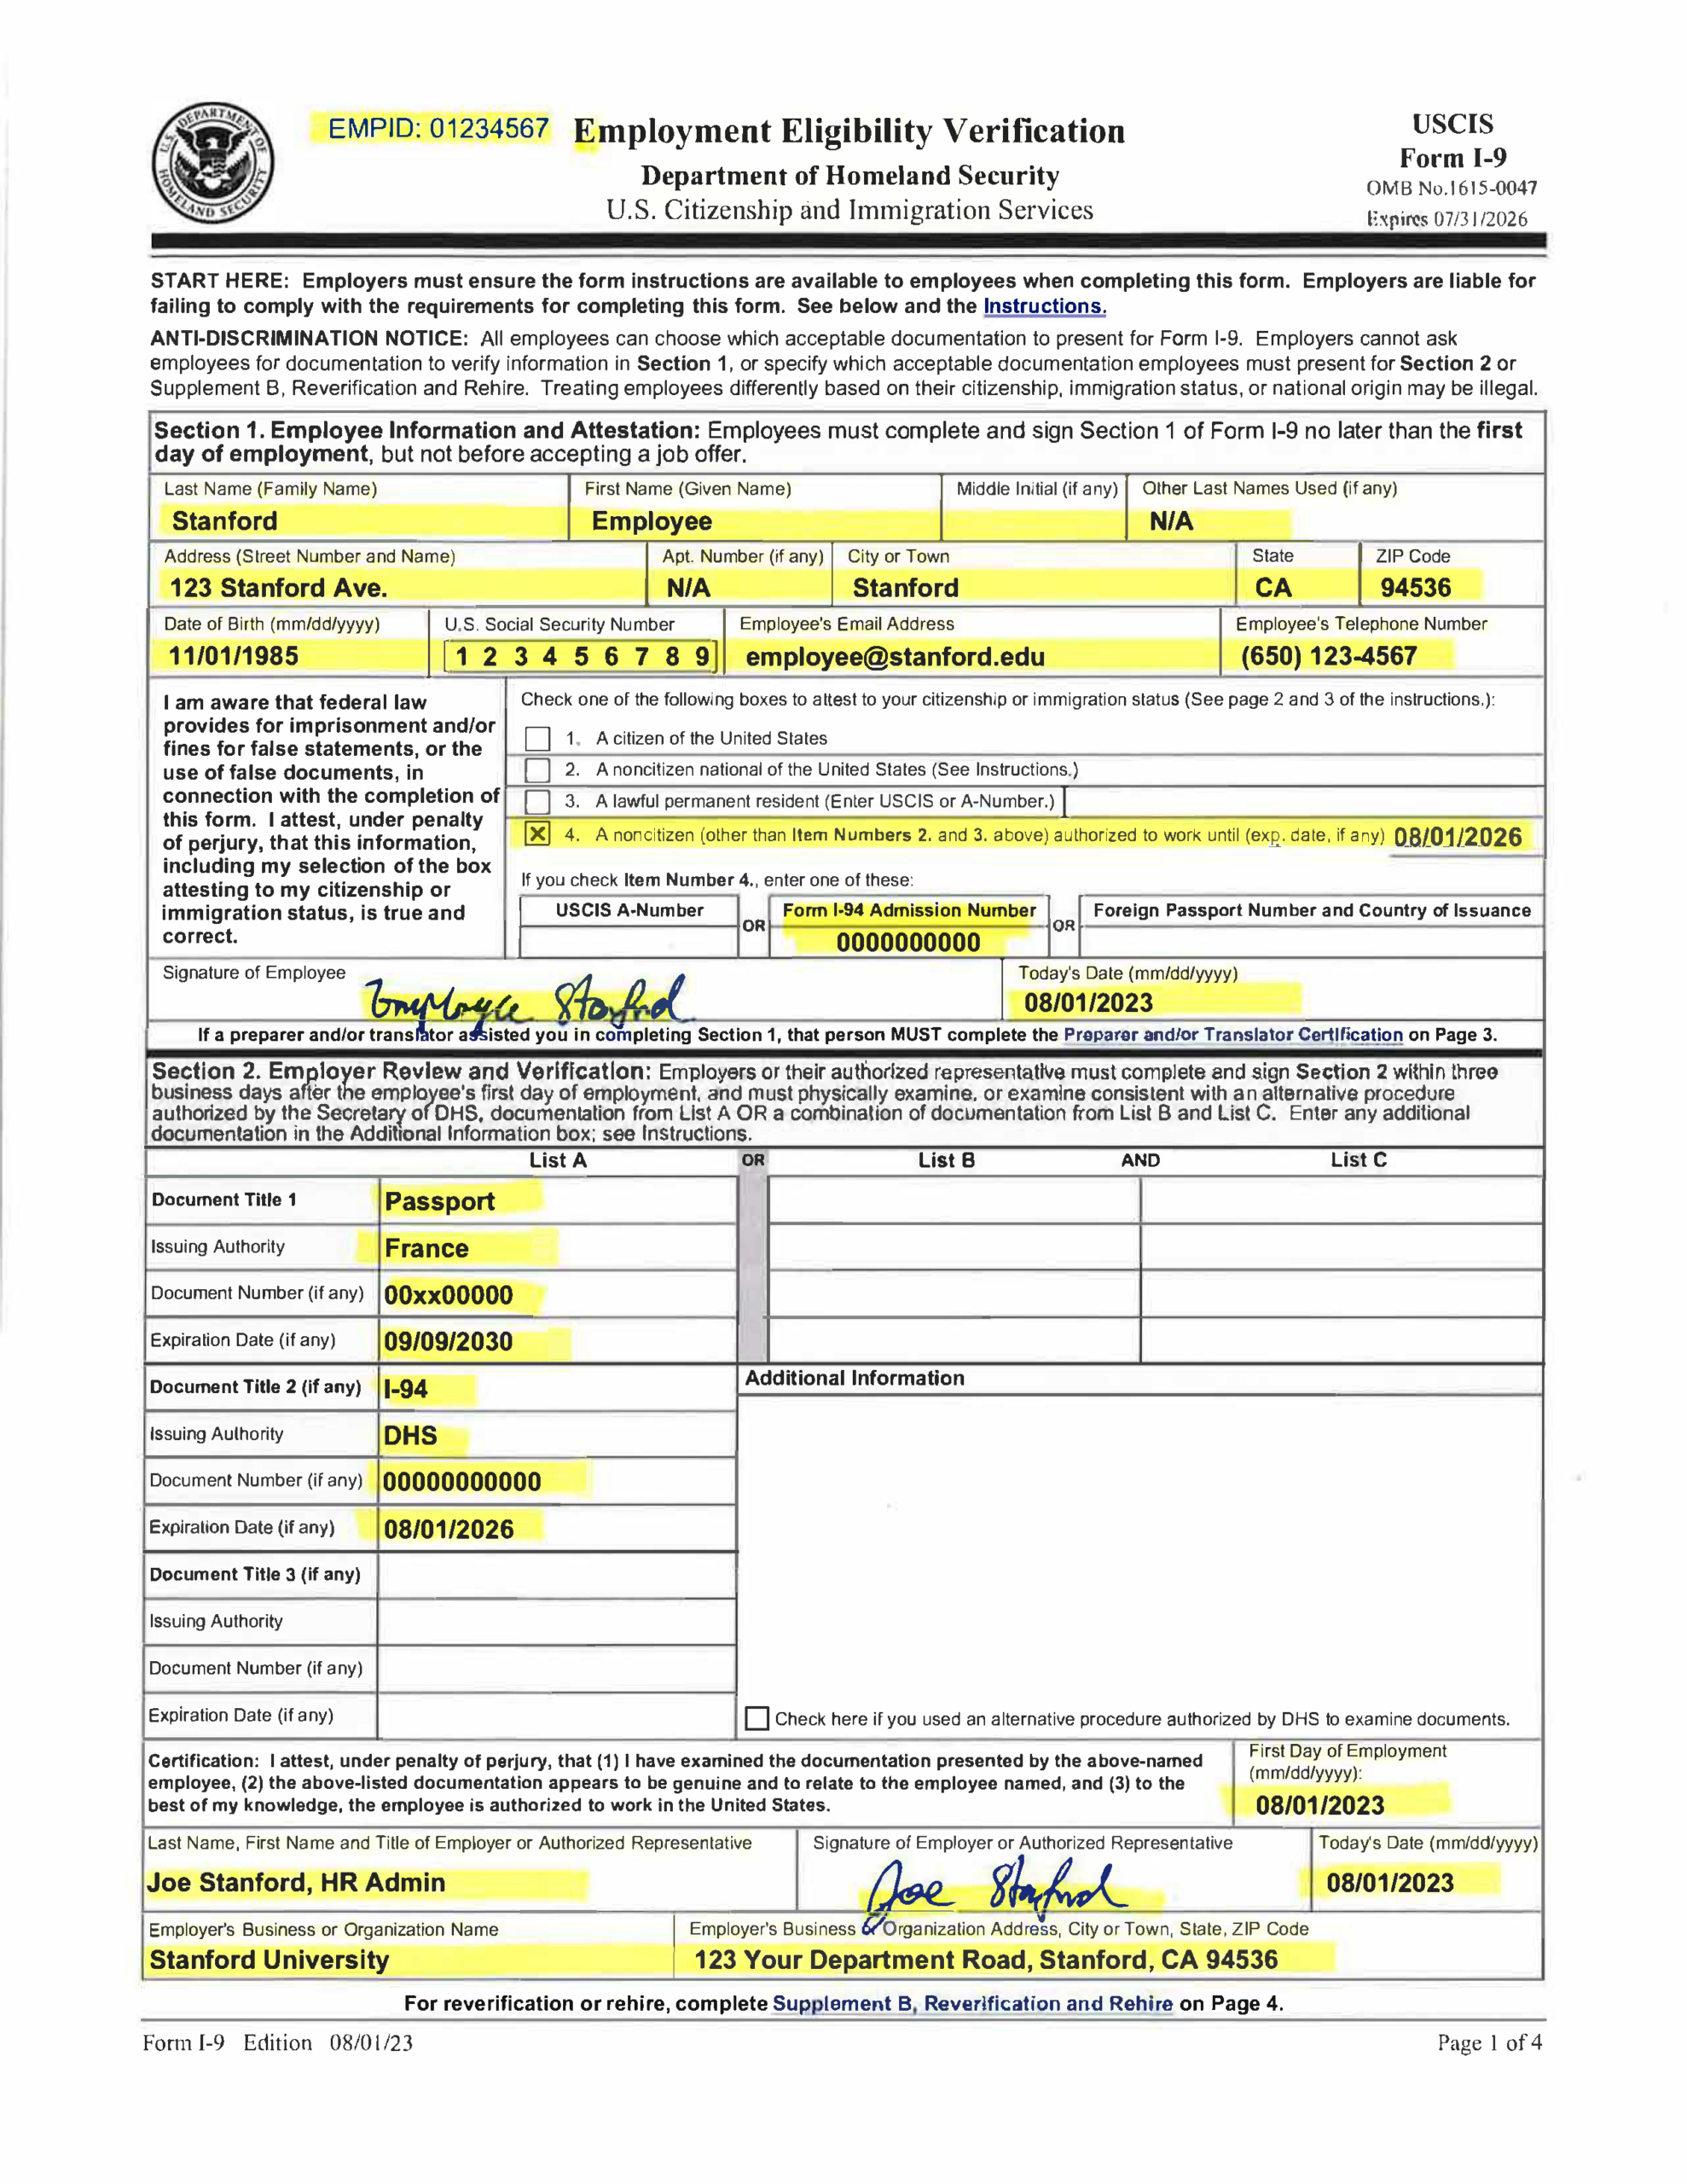 Examples Of Completed Form I-9 For Stanford intended for I-9 Form Requirements